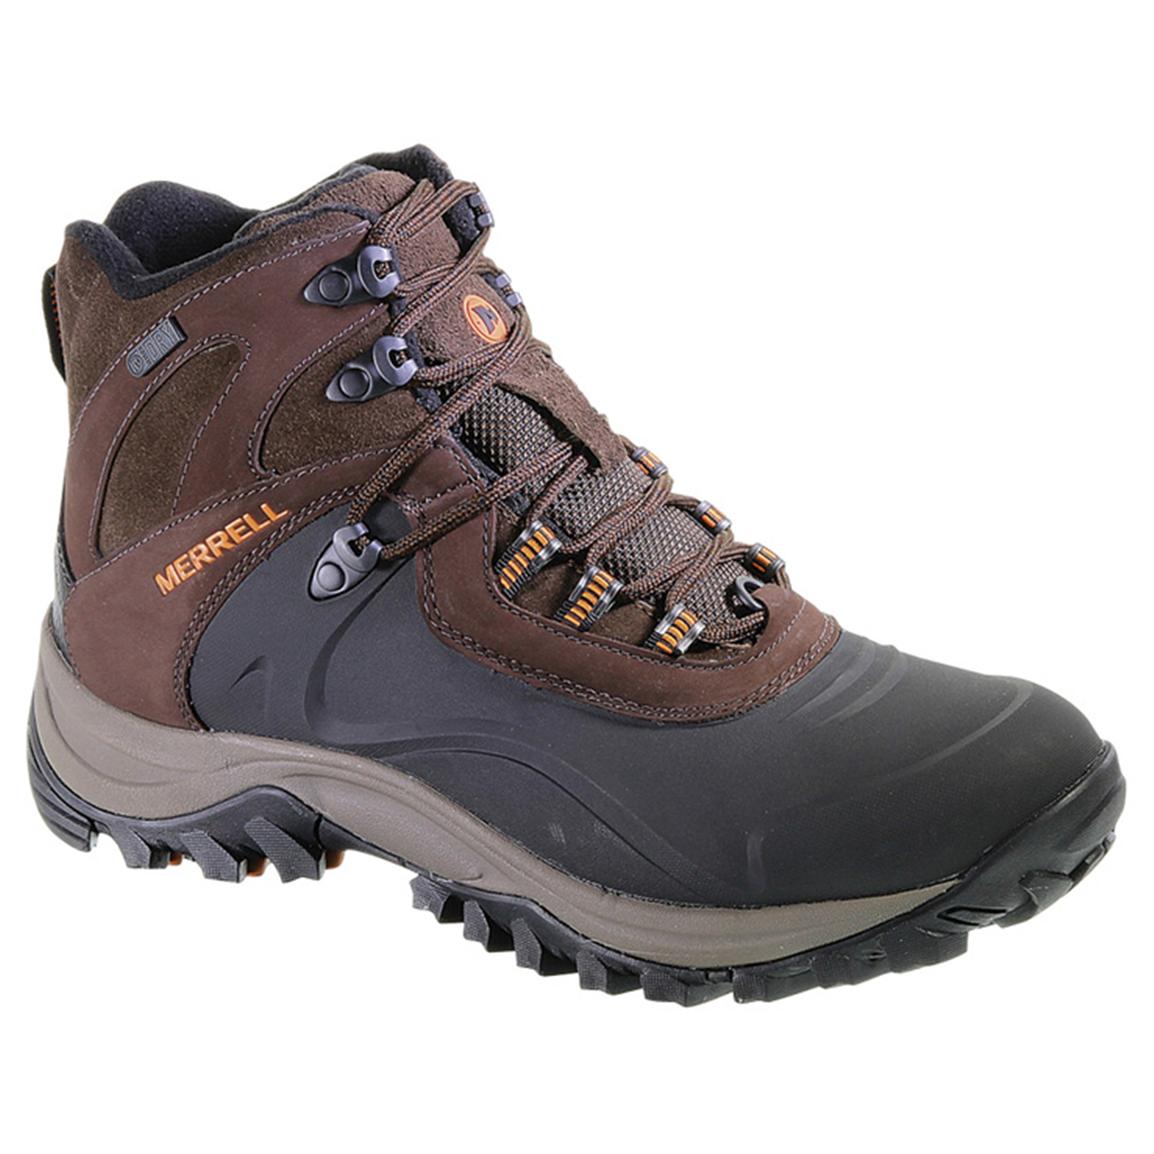 Men's Merrell Iceclaw Waterproof 200gram Insulated Mid Hiking Boots 583687, Hiking Boots